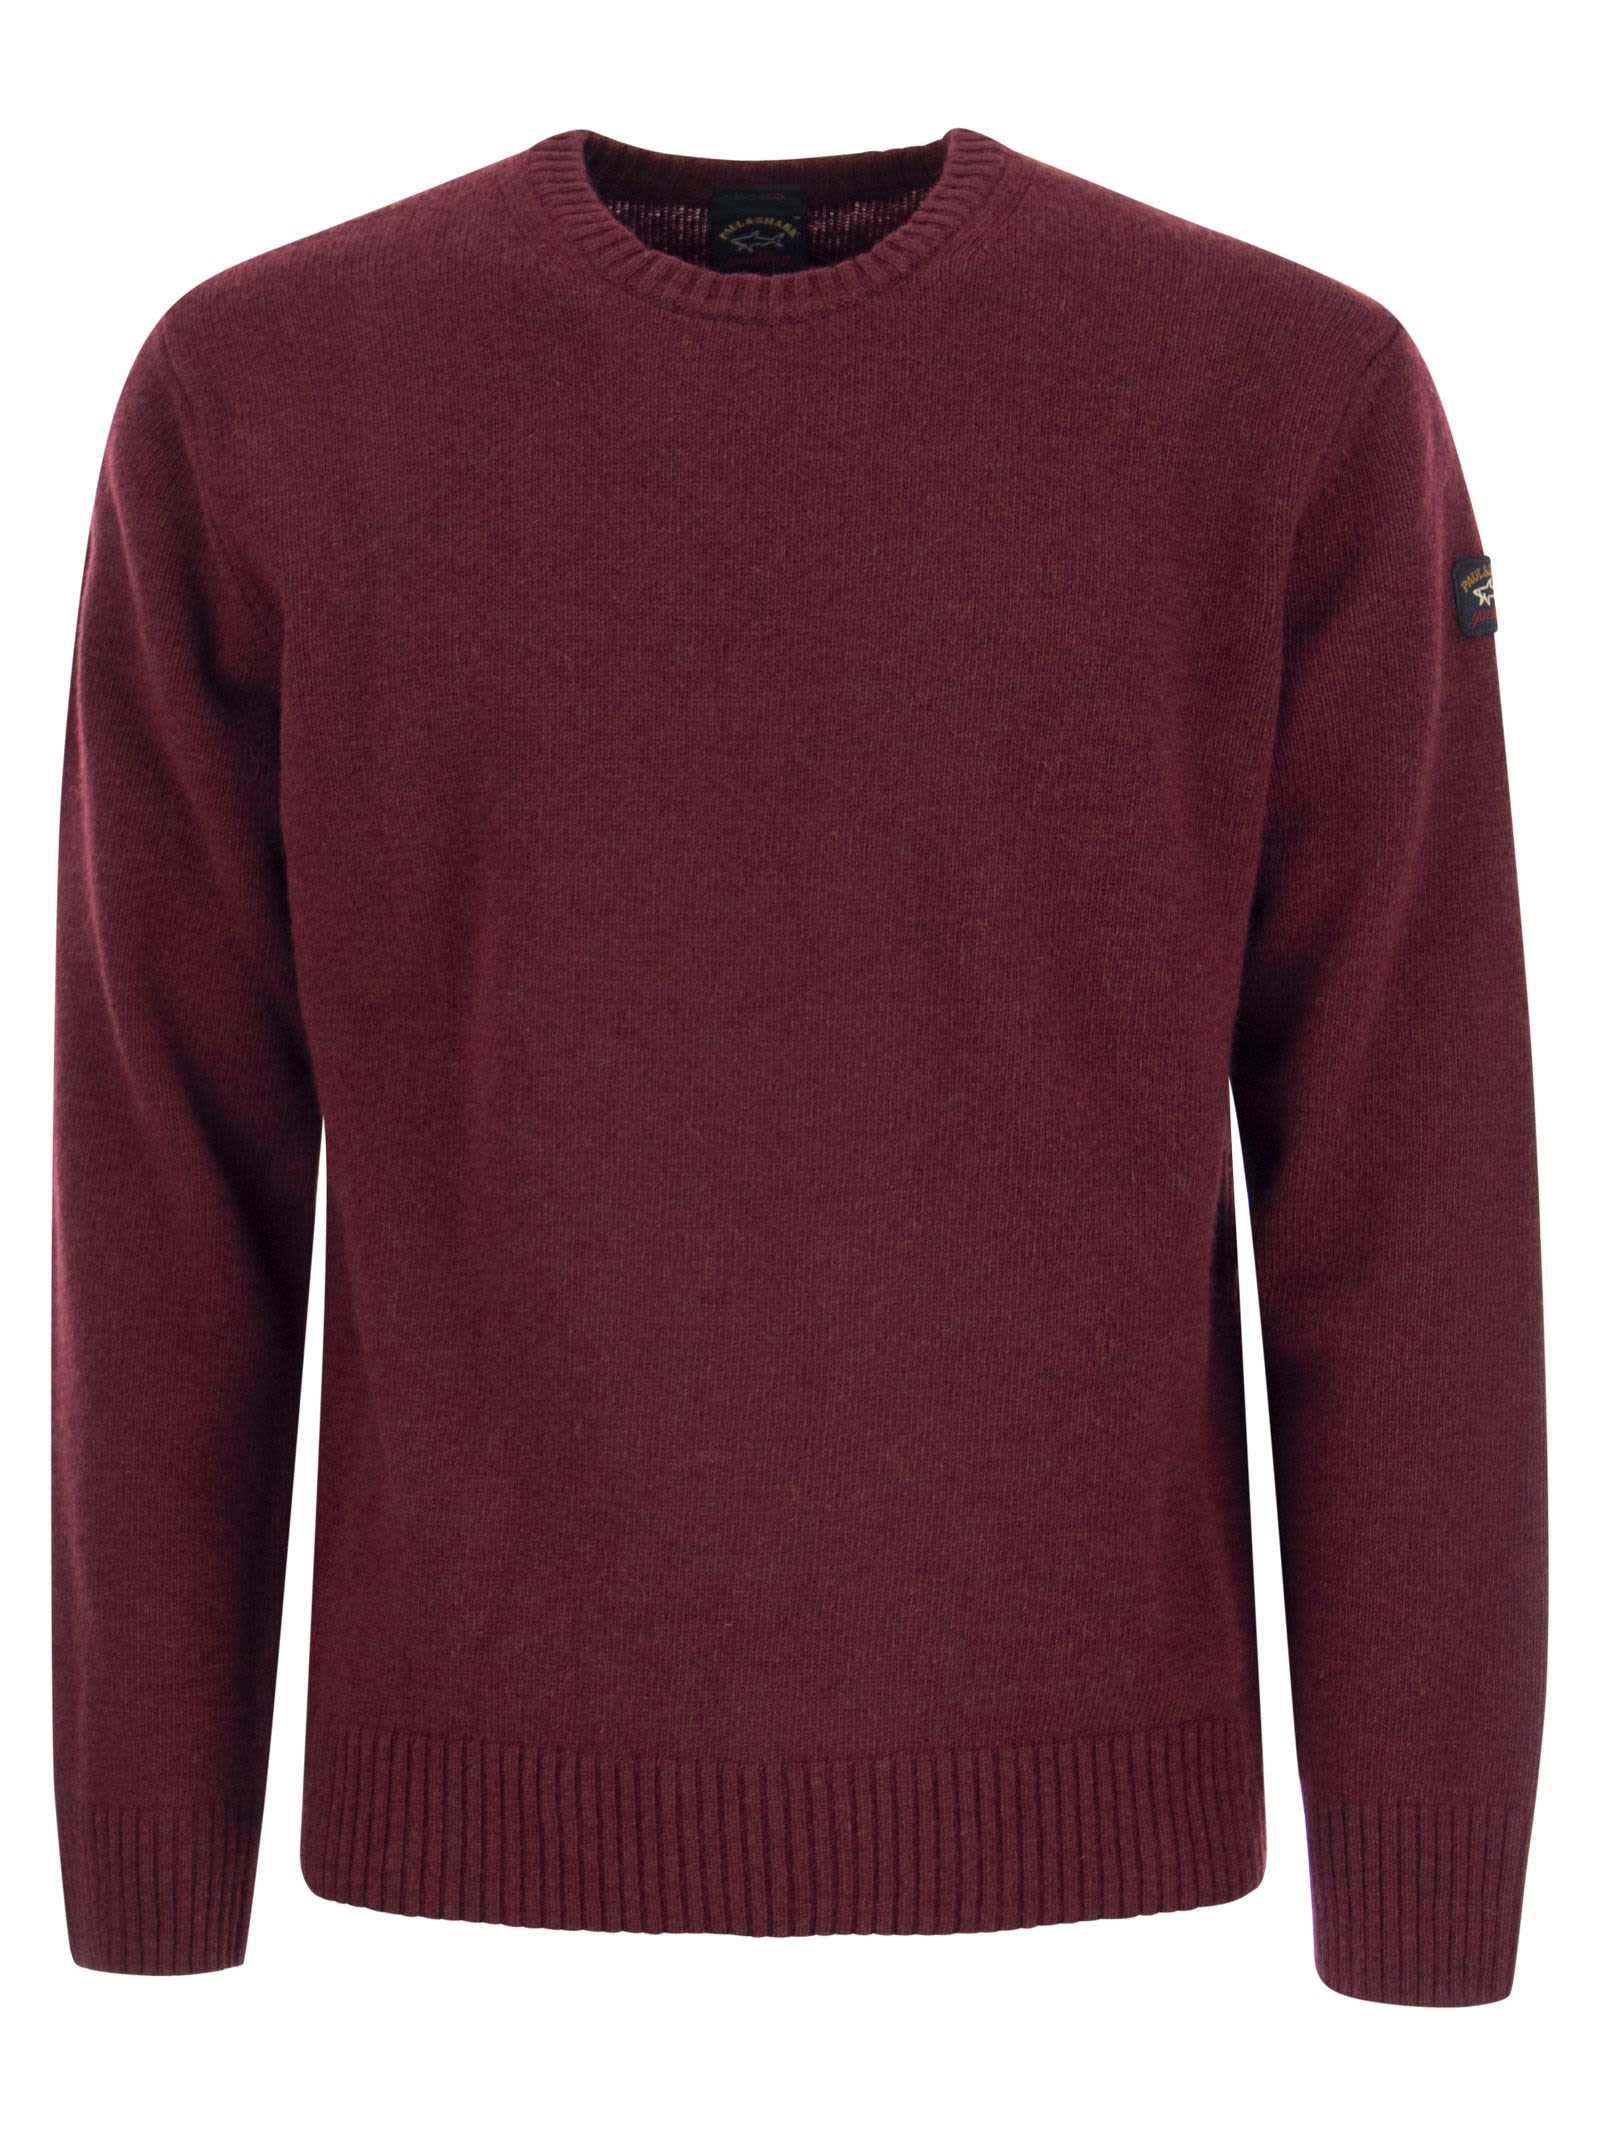 Paul&amp;shark Wool Crew Neck With Arm Patch In Bordeaux